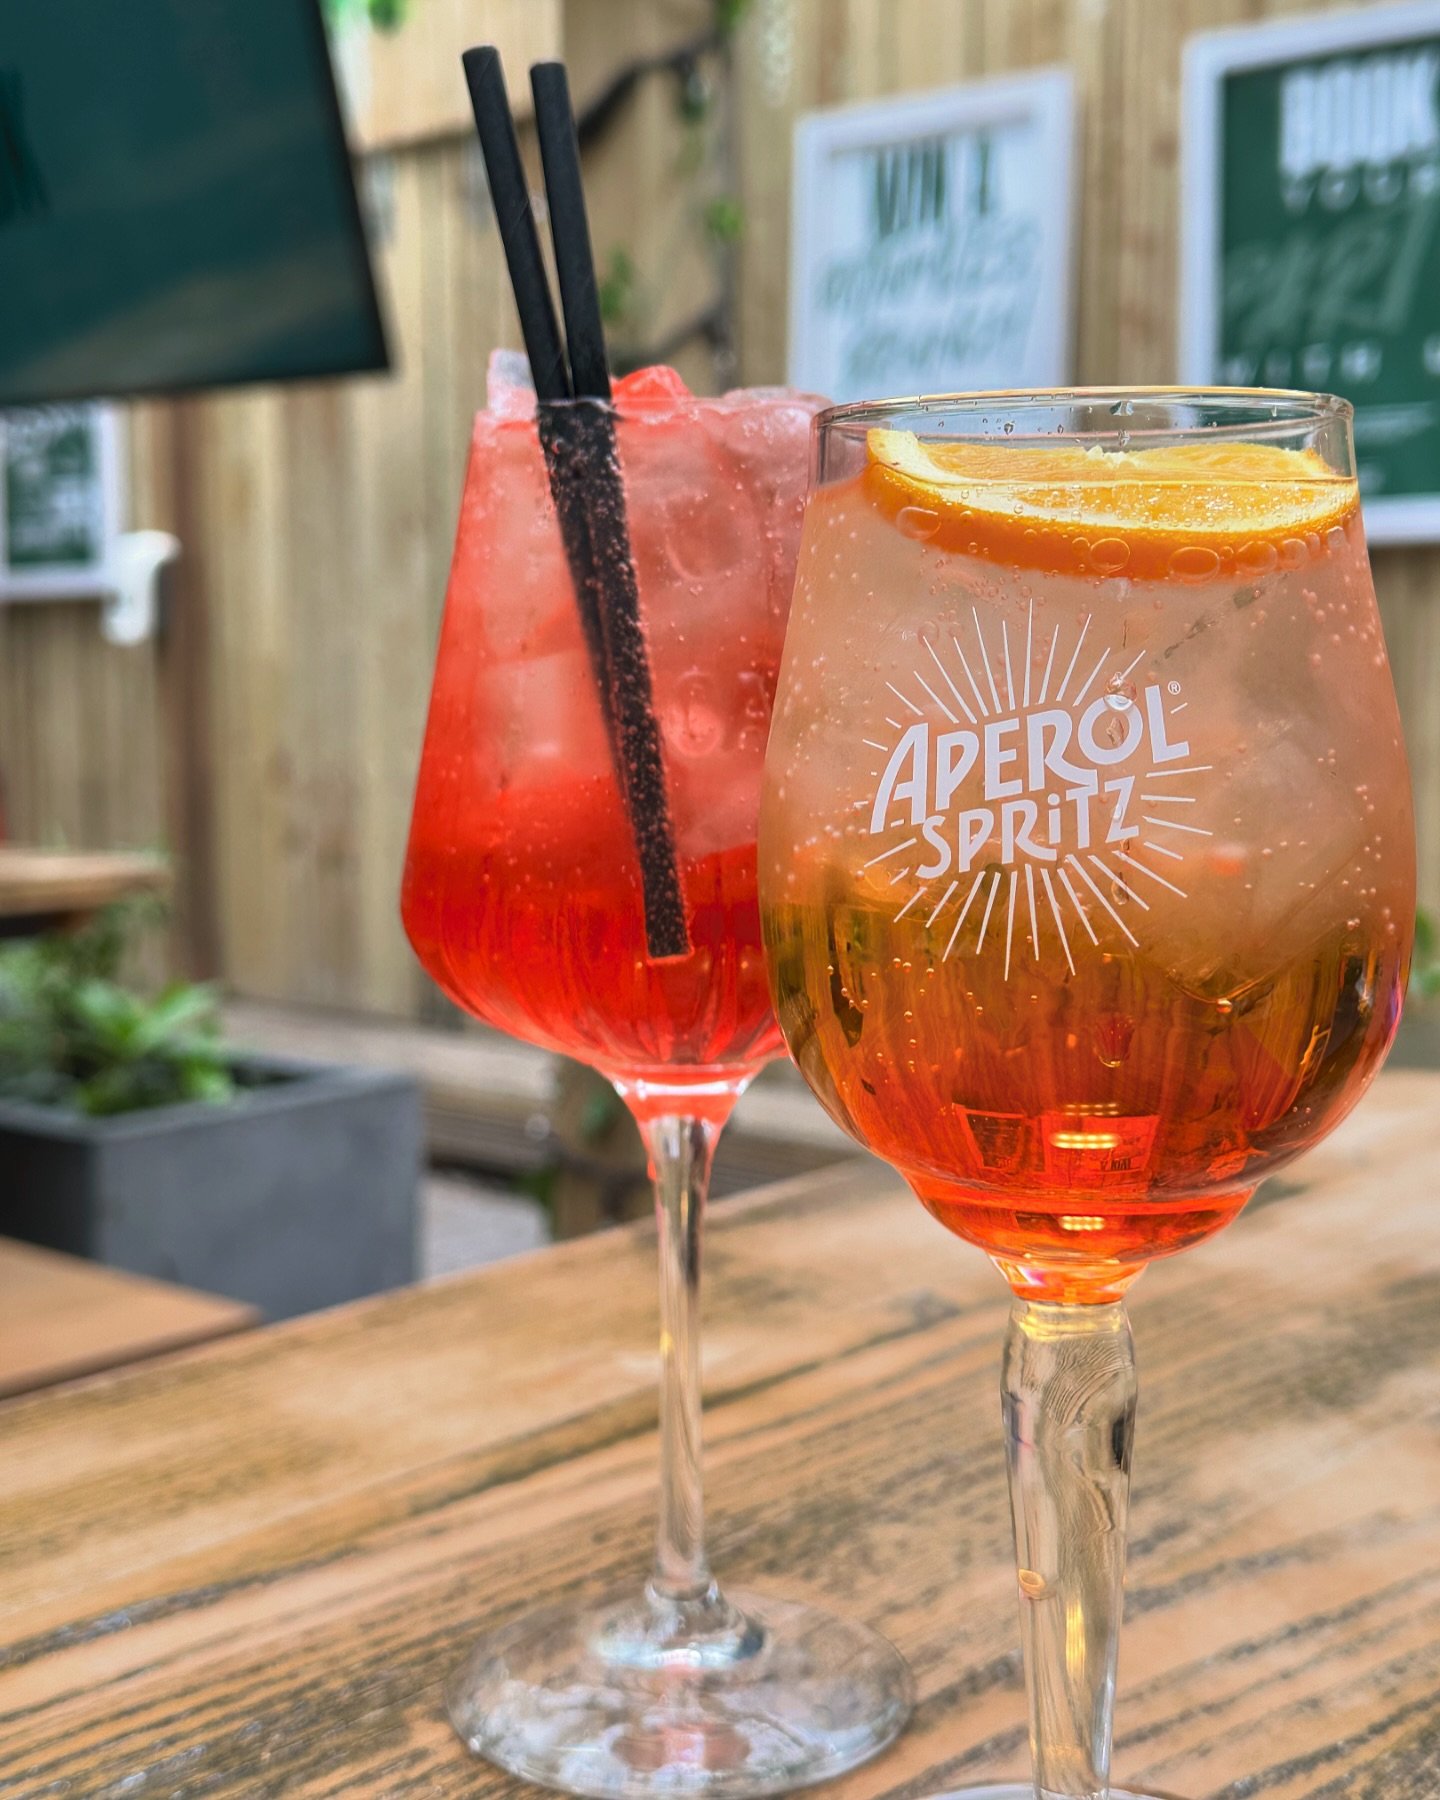 RISE &amp; SHINE - the weekend isn&rsquo;t over yet 🫡

We&rsquo;ve got plenty more cocktails to go around 🍸️

#thelawnclub #lawnclub #tlc #spinningfields #manchester #mcr #mcrdrinks #manchesterdrinks #cocktail #aperol #aperolspritz #campari #weeken